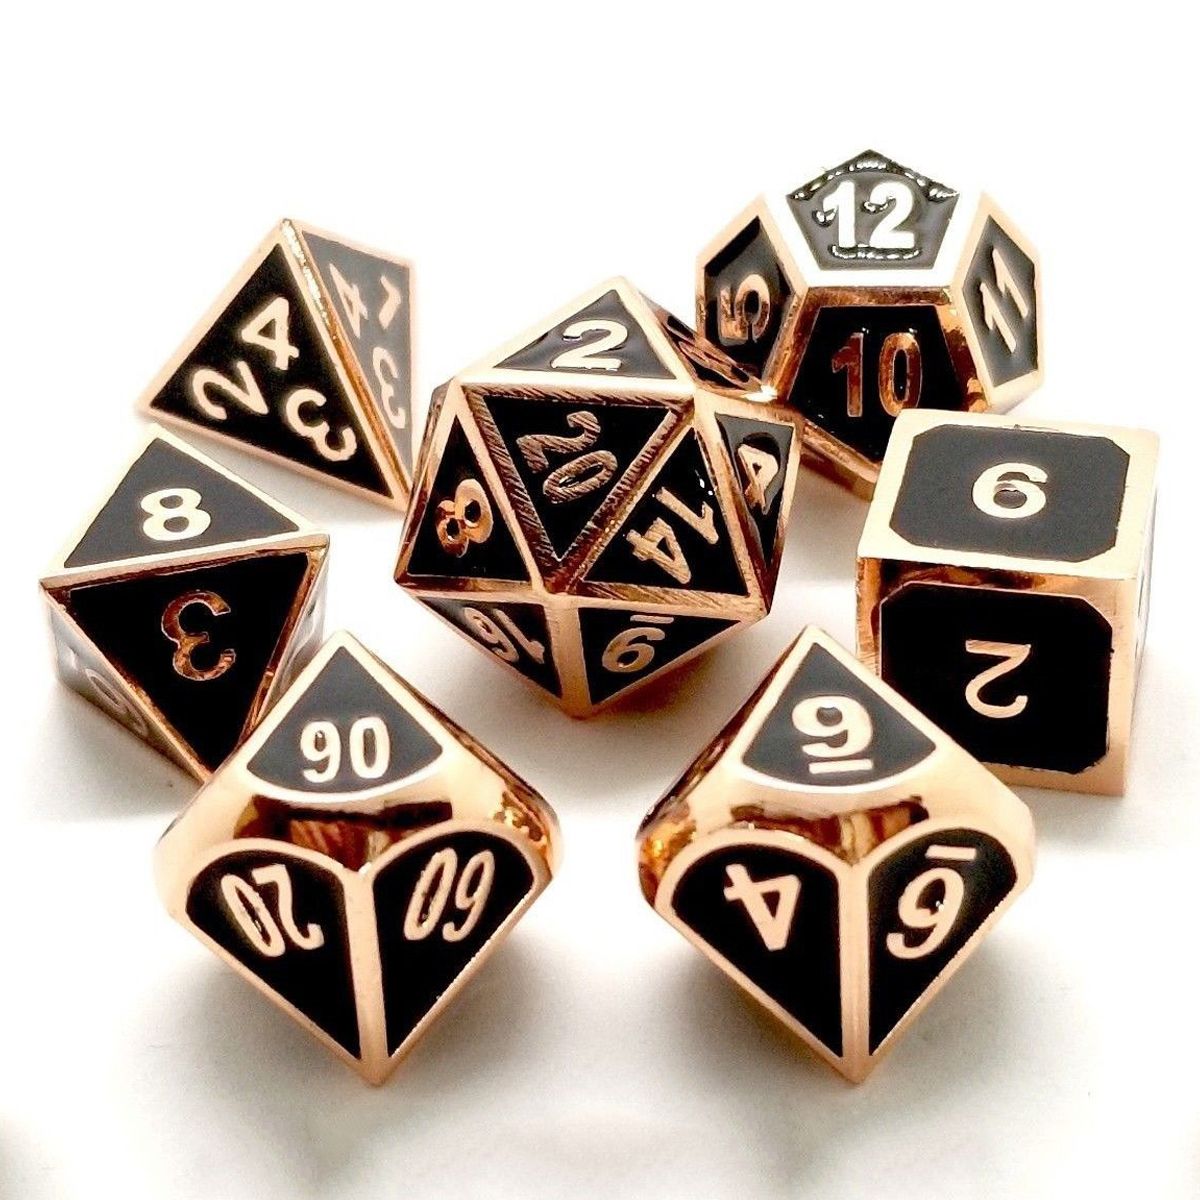 ECUBEE-Solid-Metal-Polyhedral-Dice-Role-Playing-RPG-7-Dice-Set-With-Bag-Multisided-Dice-Set-1261839